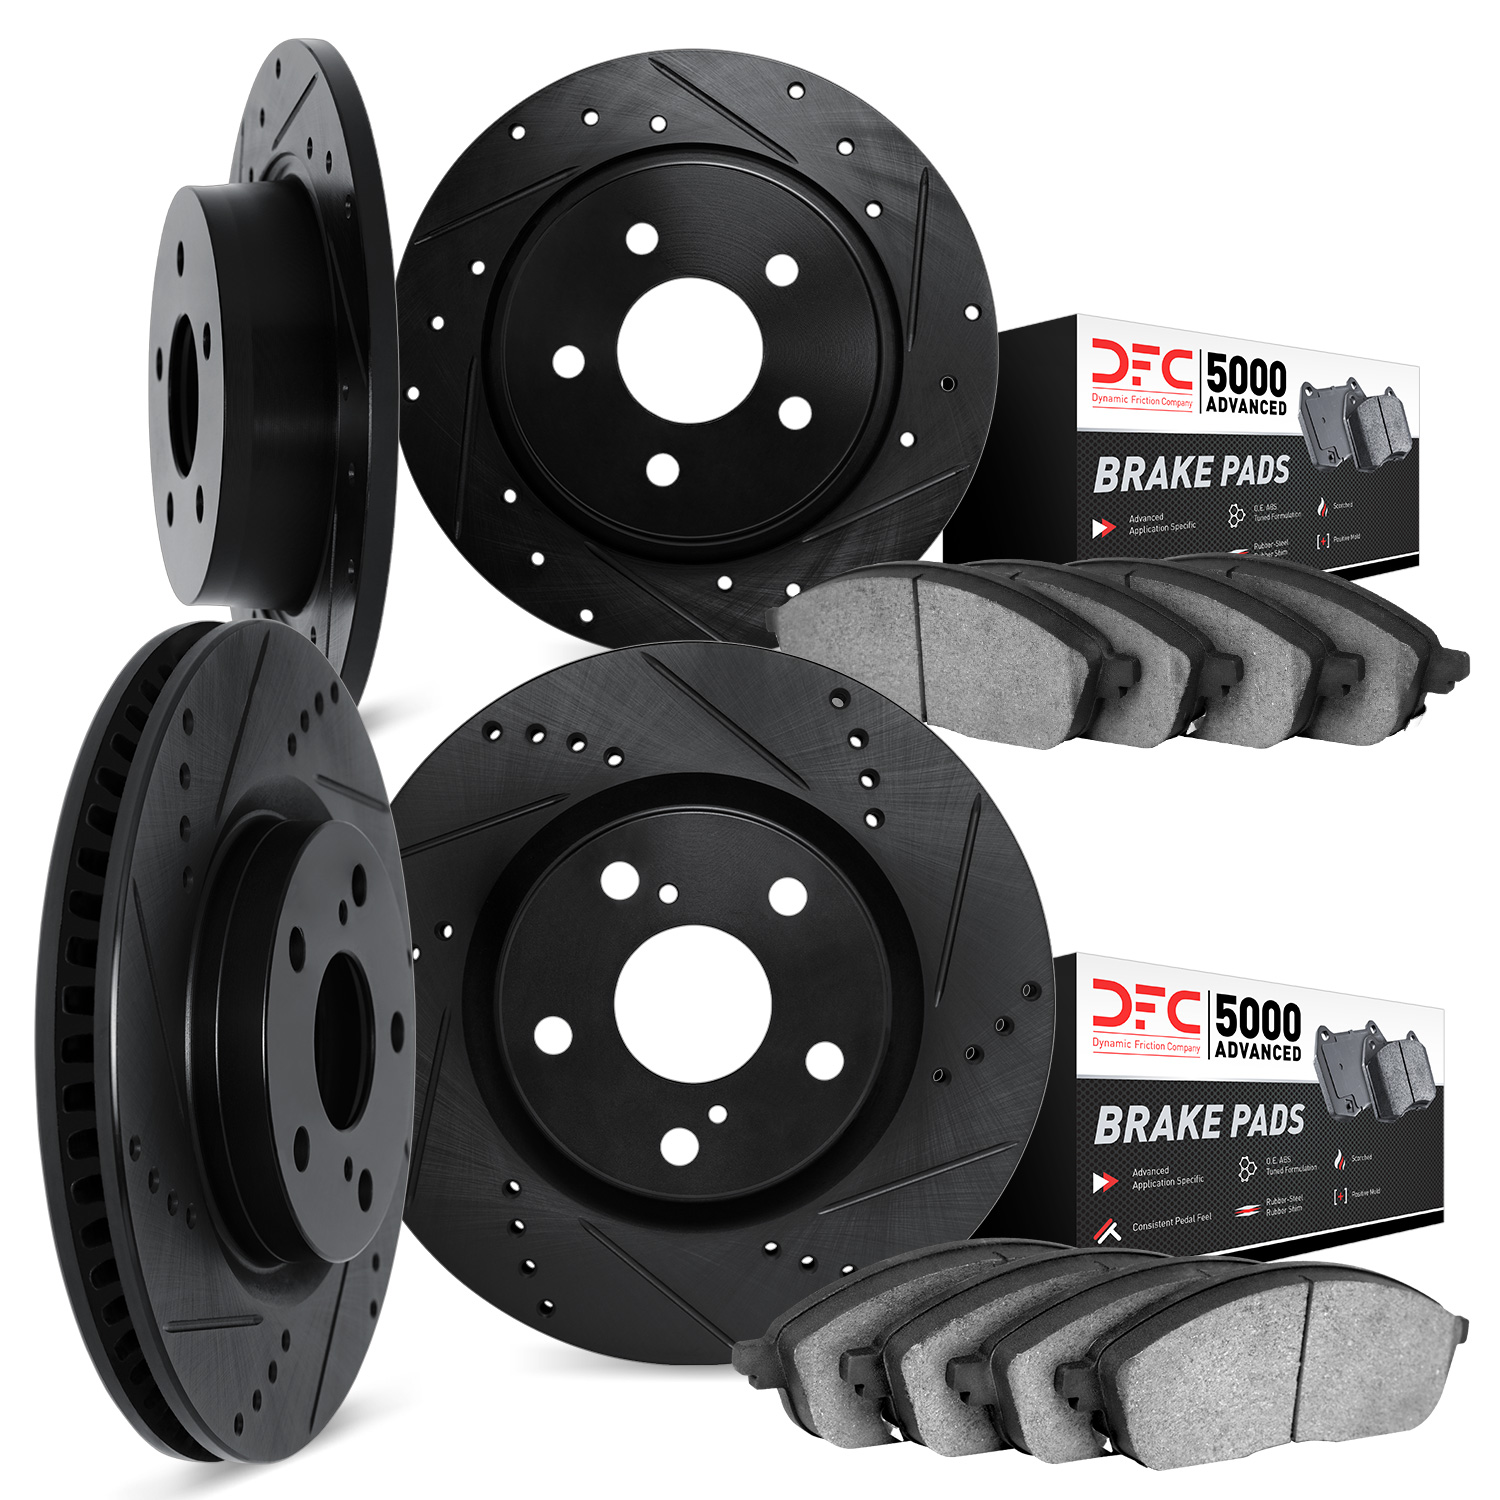 8504-31062 Drilled/Slotted Brake Rotors w/5000 Advanced Brake Pads Kit [Black], 2000-2006 BMW, Position: Front and Rear